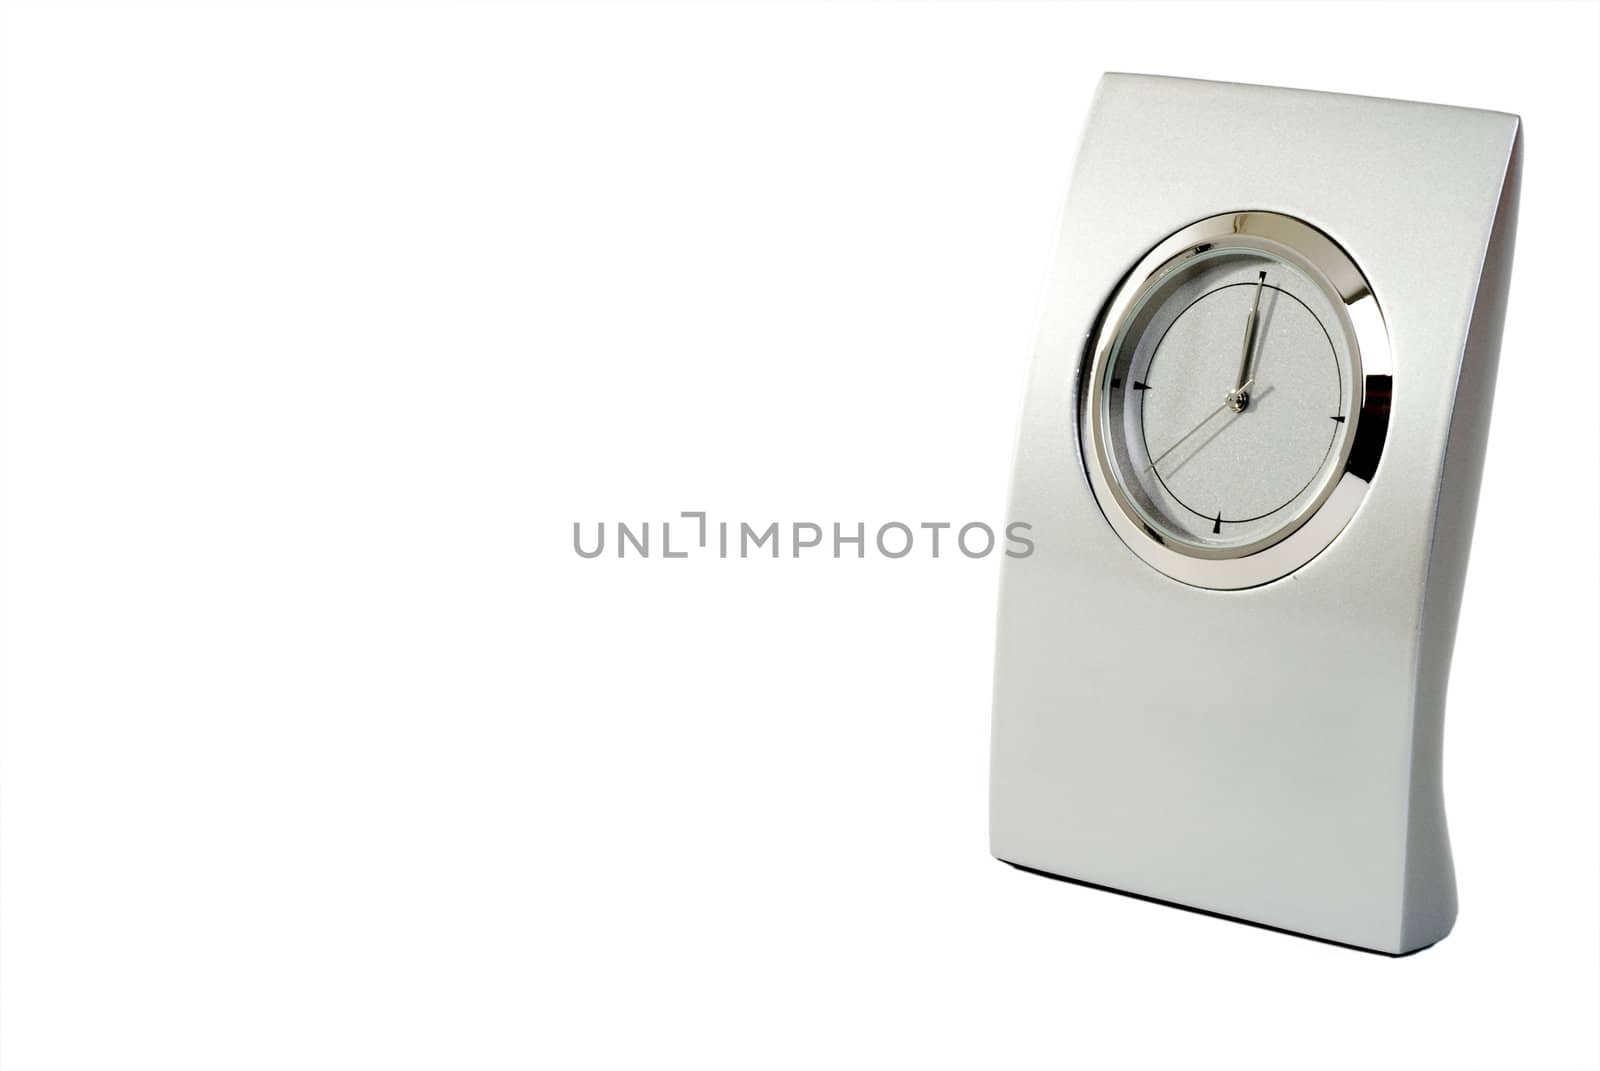 Clock on white background by eugenef